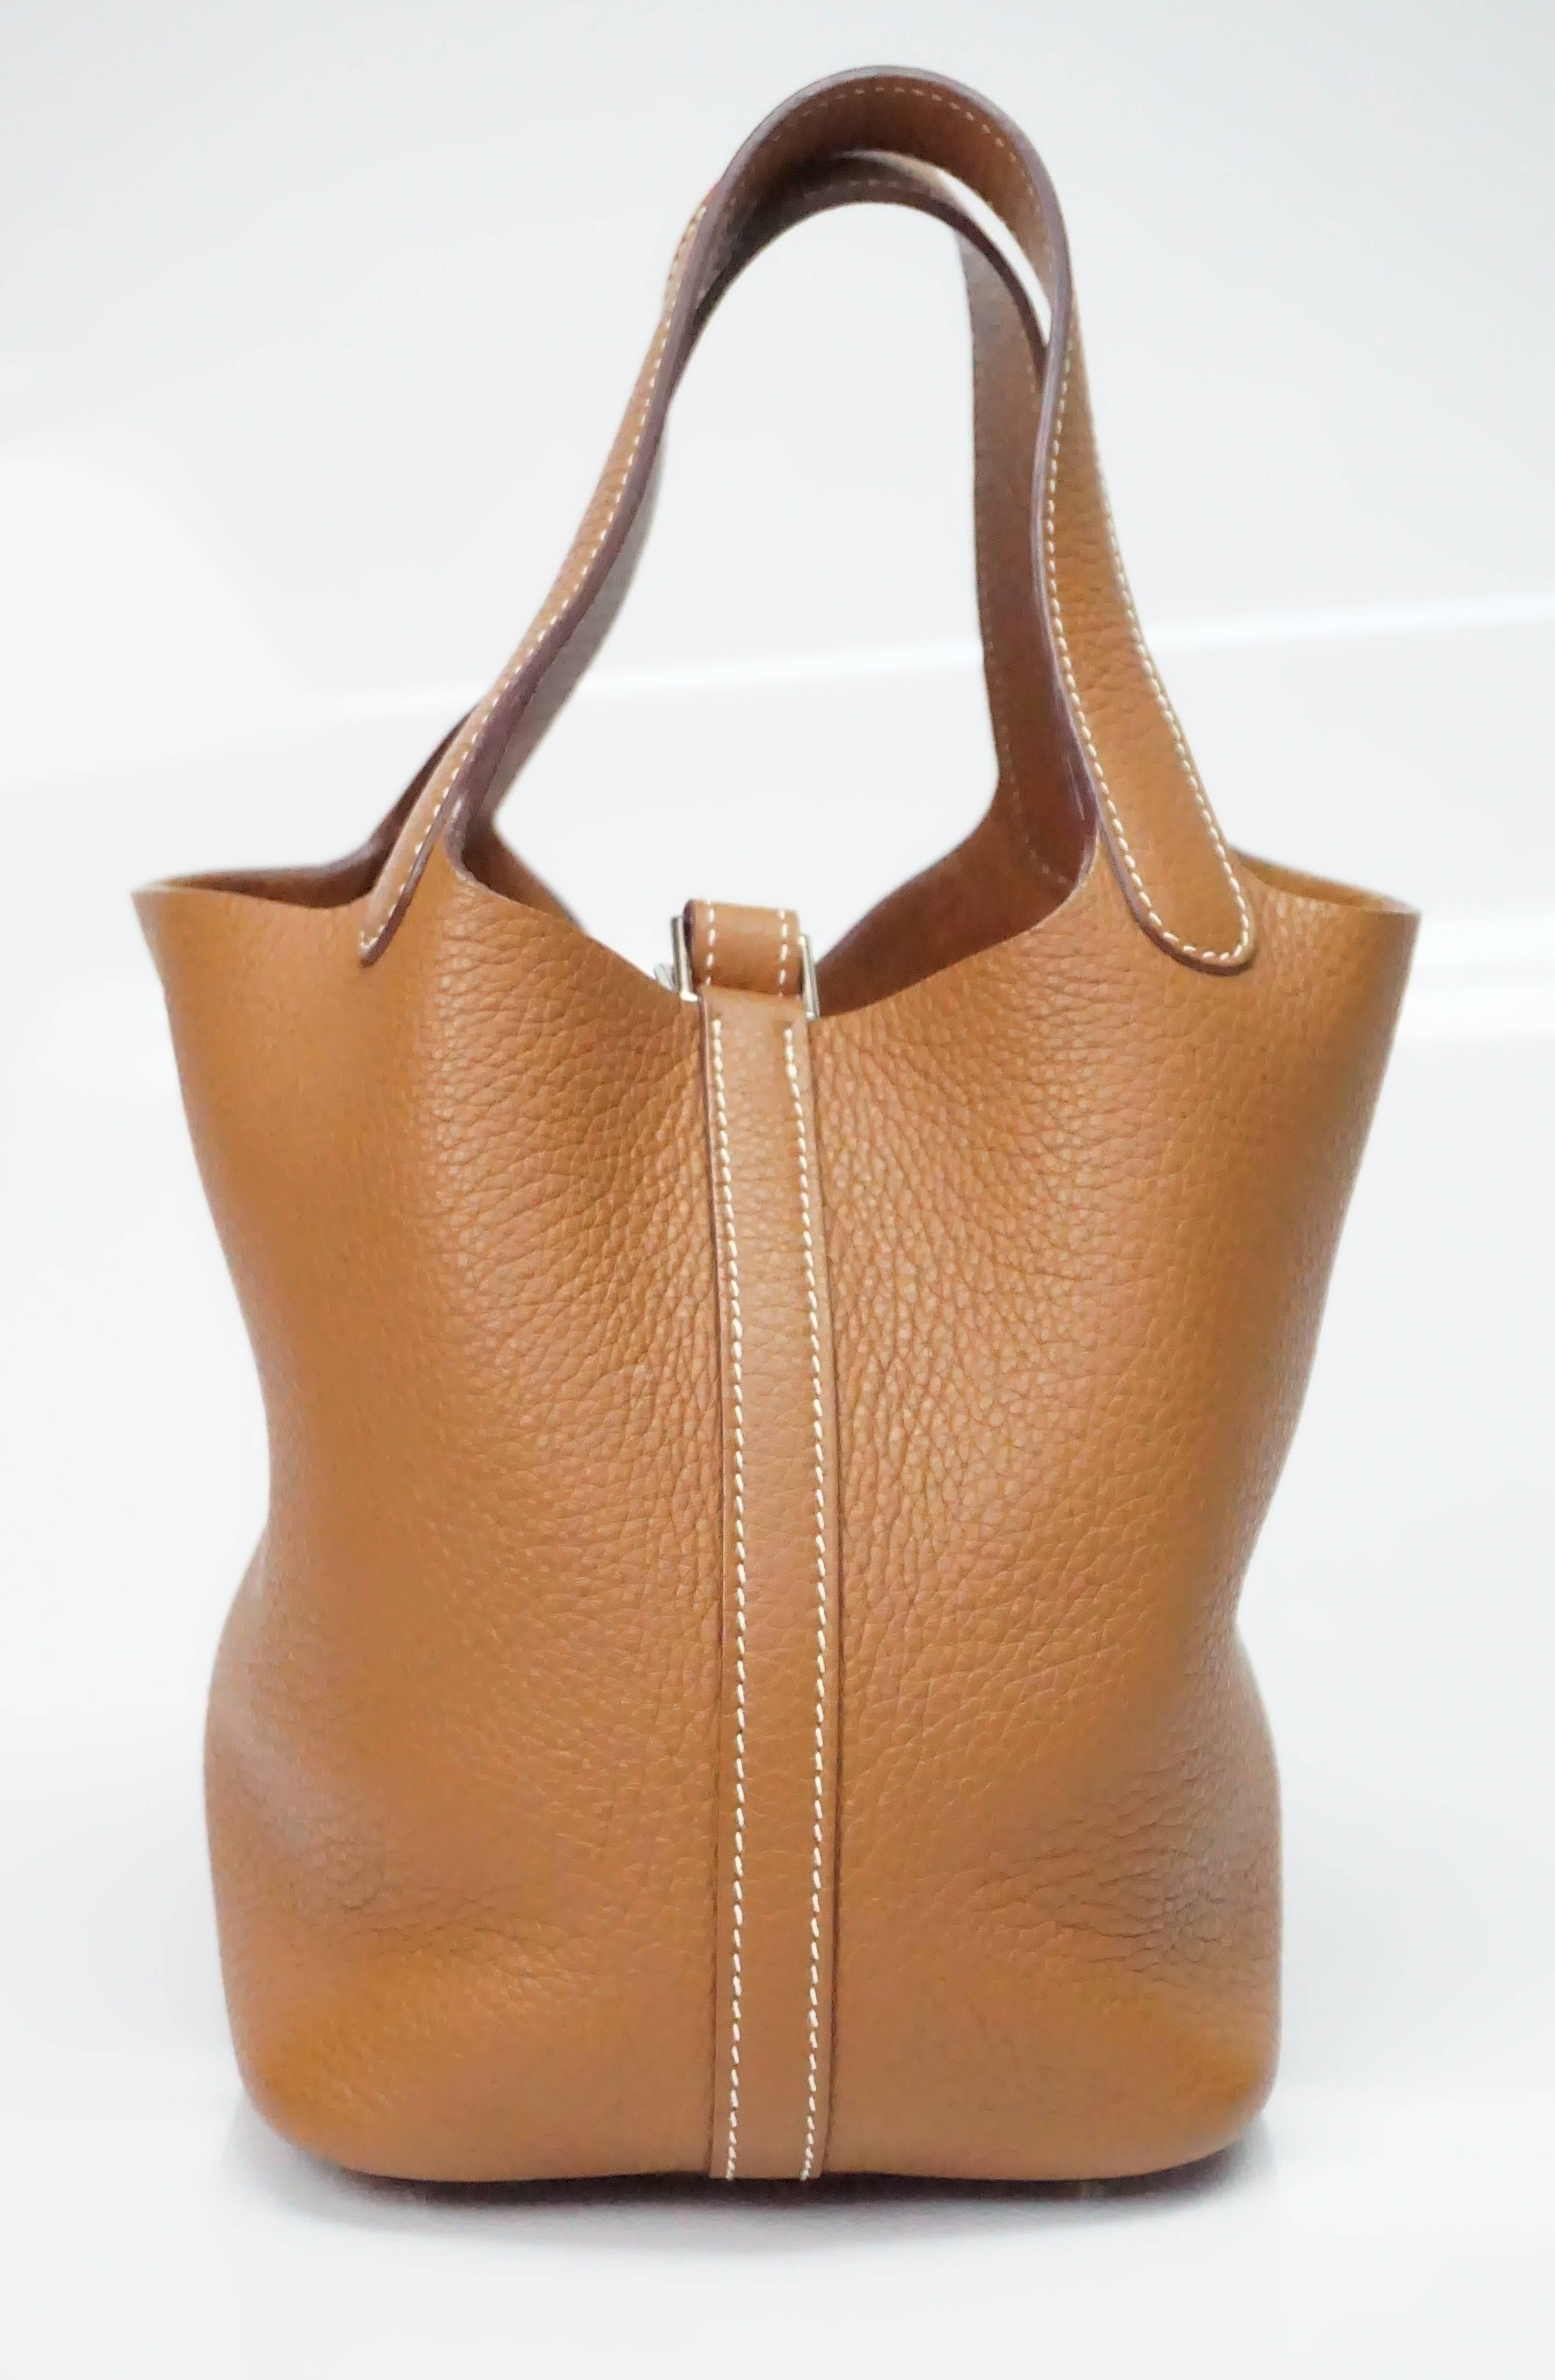 Hermes Gold Leather Picotin Lock PM Bag SHW - 2009  This Hermes Picotin is in excellent condition. It has two handles, white/ivory stitching throughout the bag with SHW. It has one main compartment and closes with an inside buckle type strap. It has